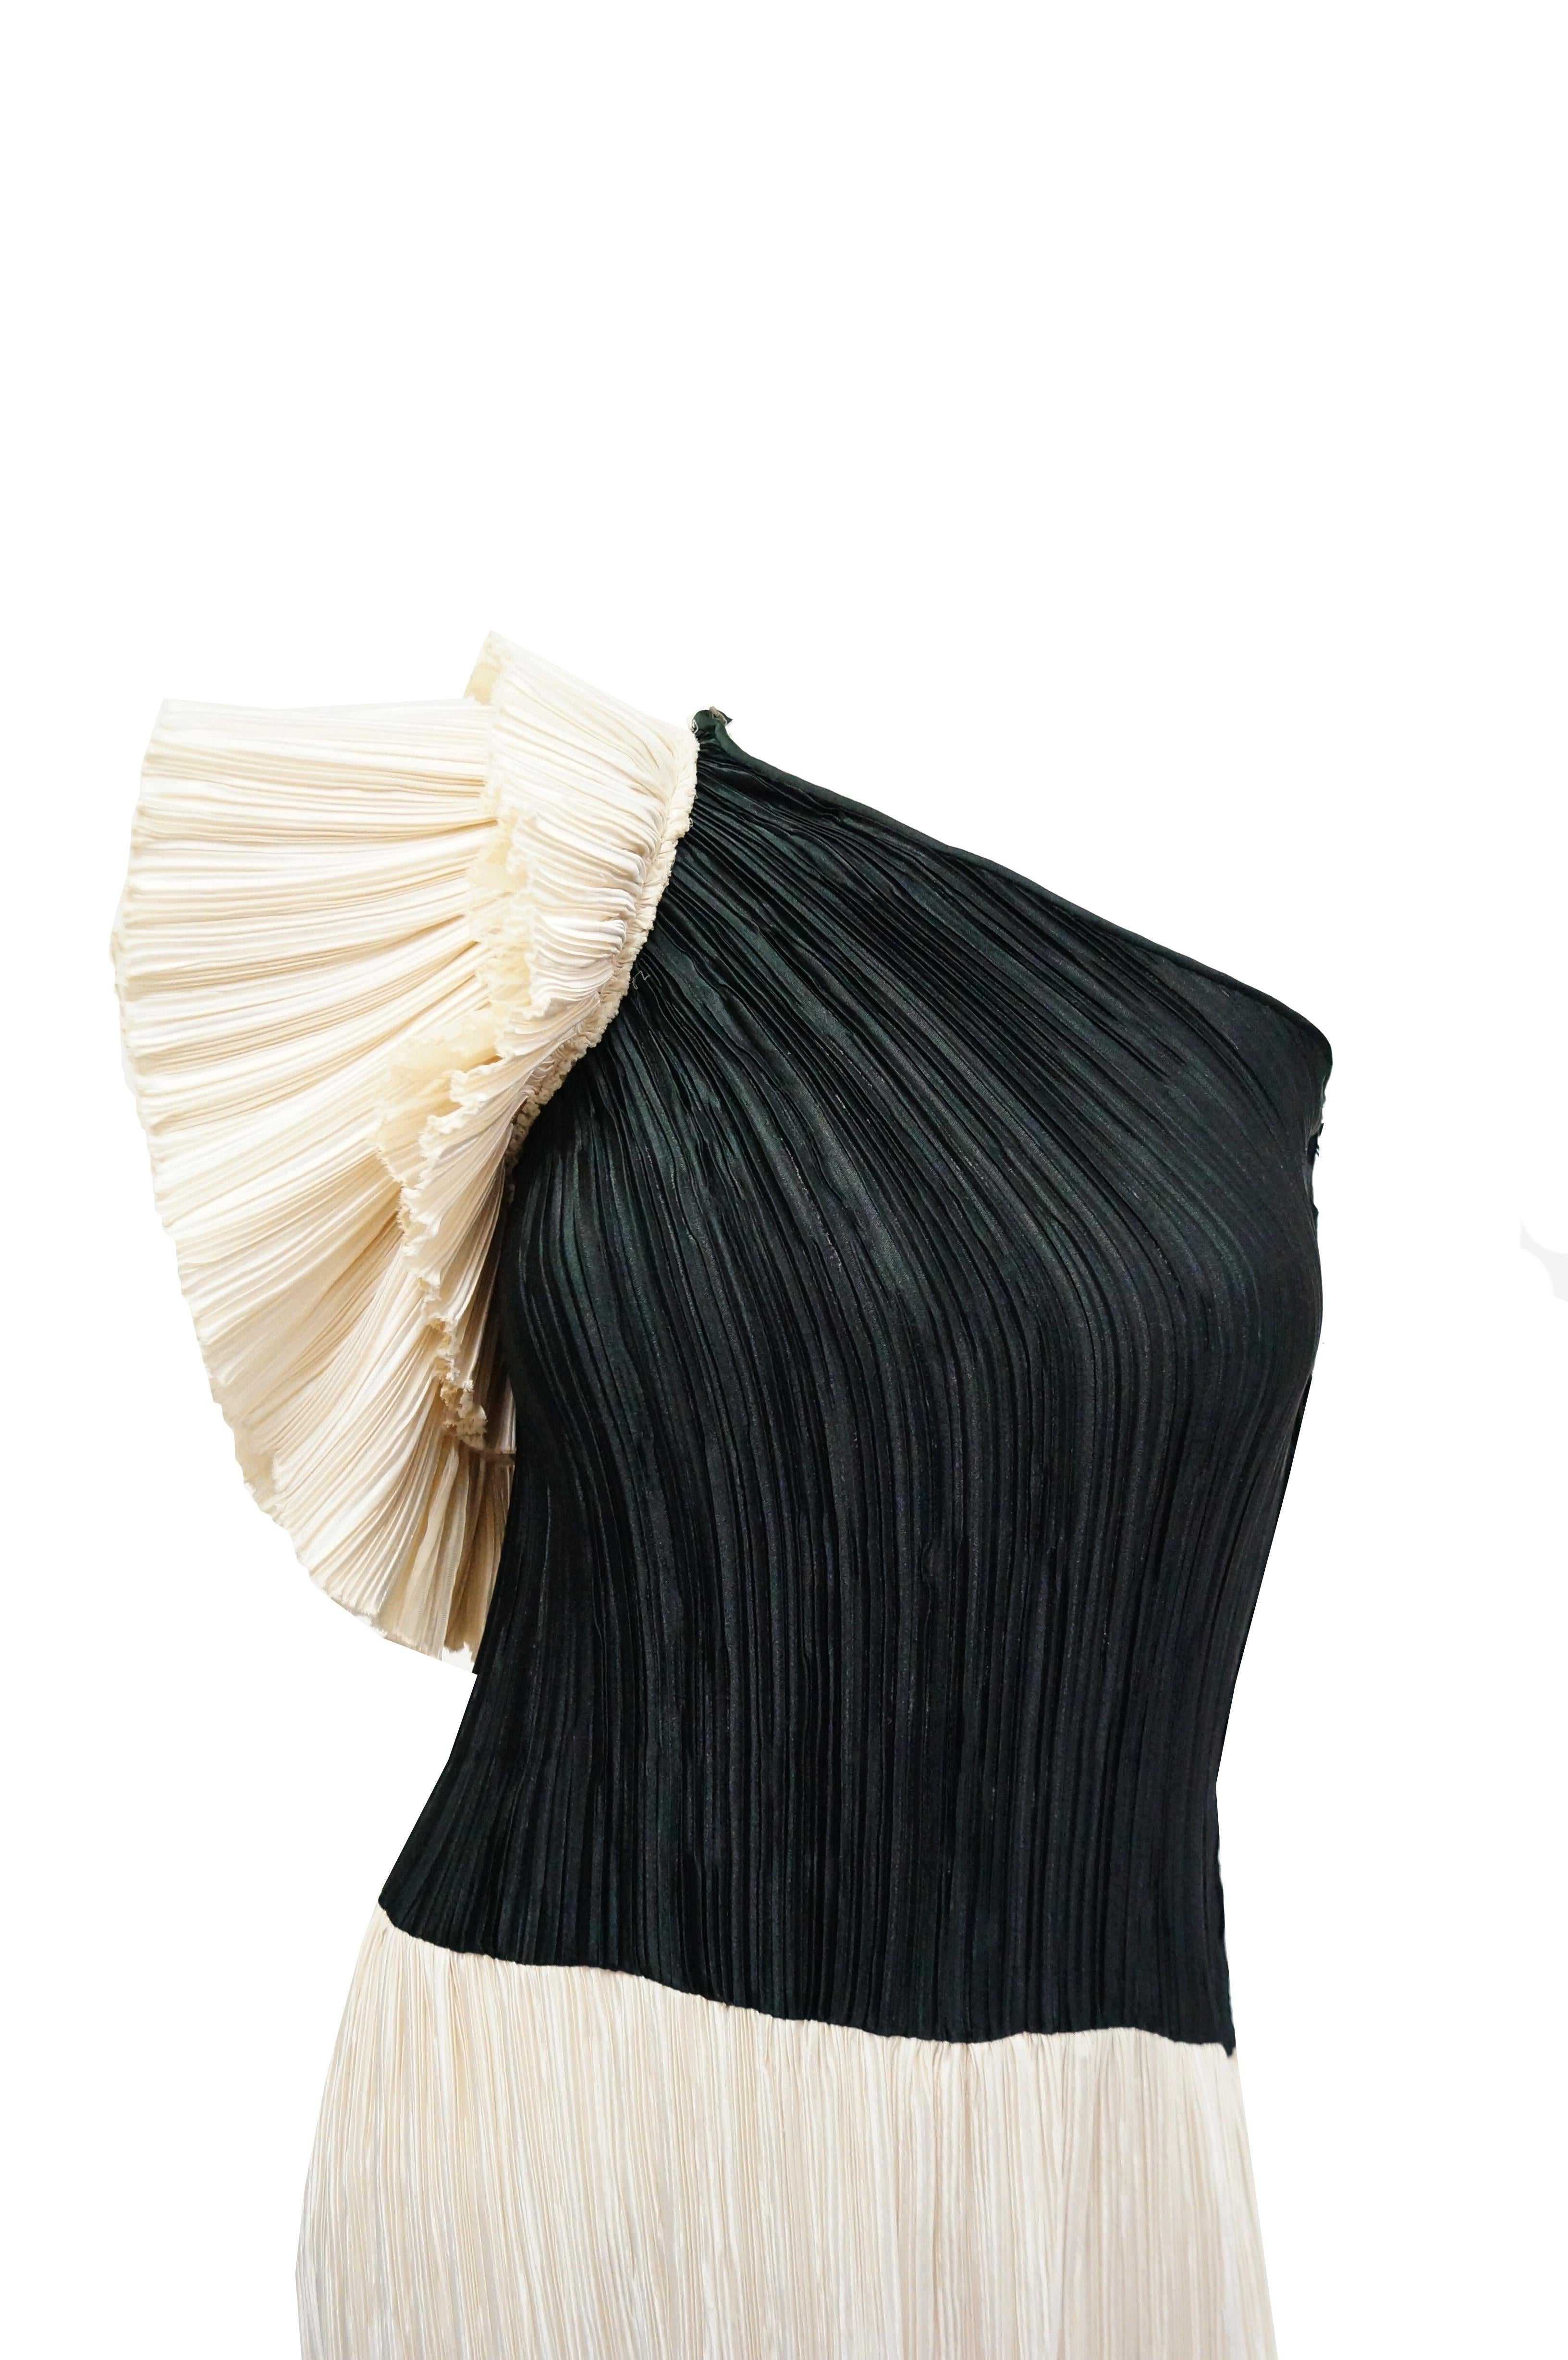 Beautifully done Fortuny style black and white pleated off the shoulder minimalist evening dress. Column silhouette with a lovely layered flounce detail. The use of black and white paired with a one shoulder  flounce add quiet drama, creating class